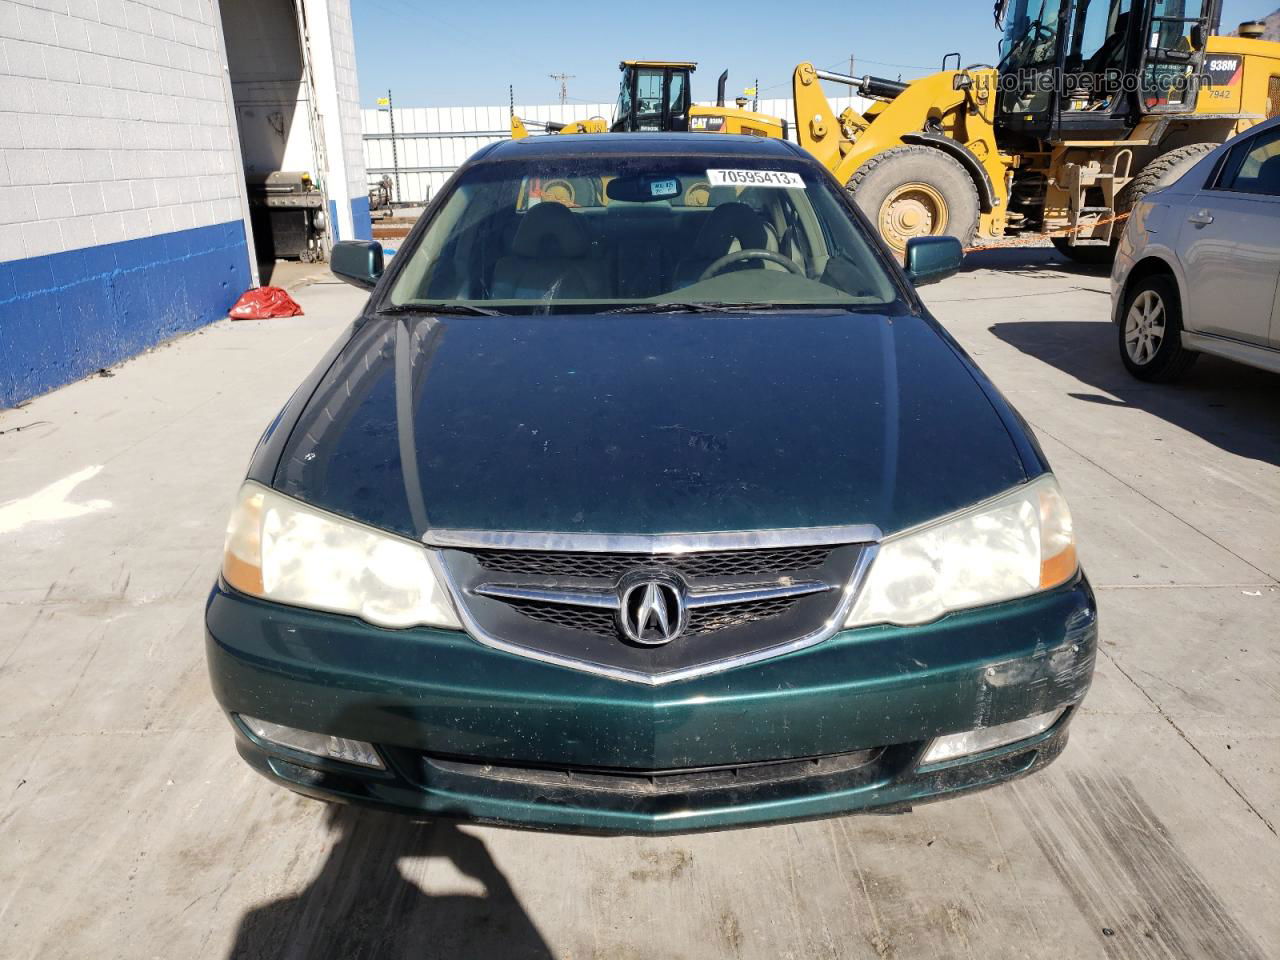 2002 Acura 3.2tl Type-s Green vin: 19UUA56822A047909